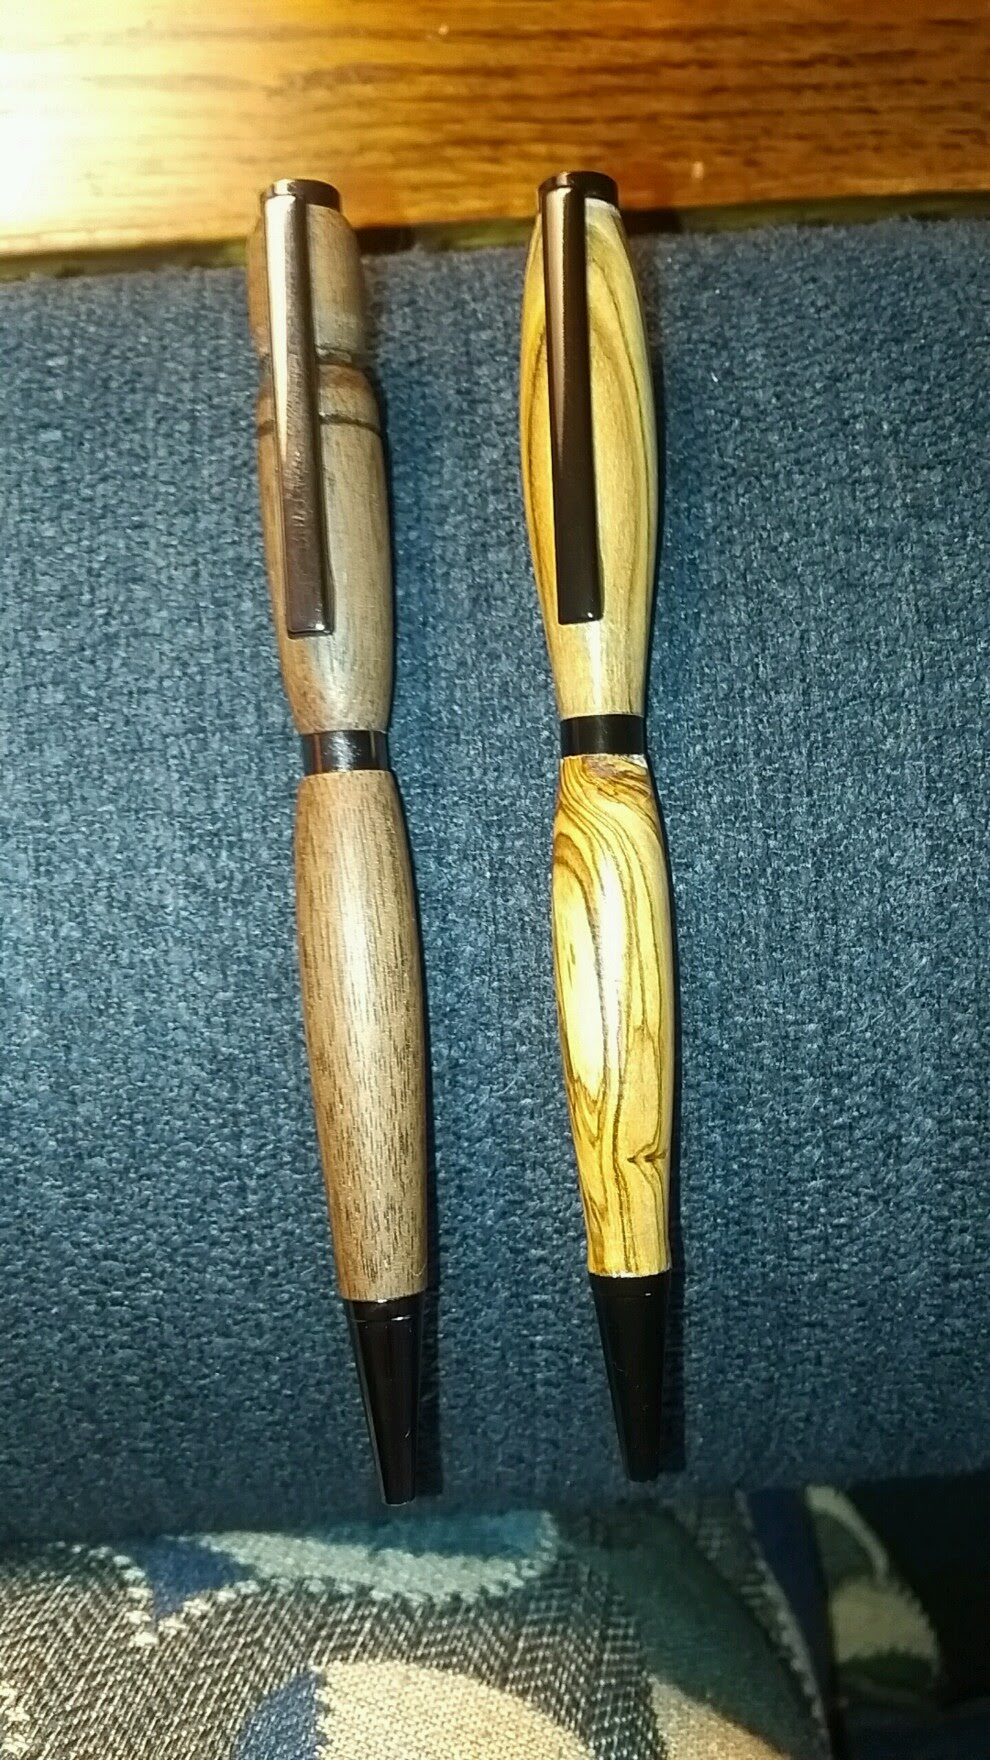 Some exotic woods